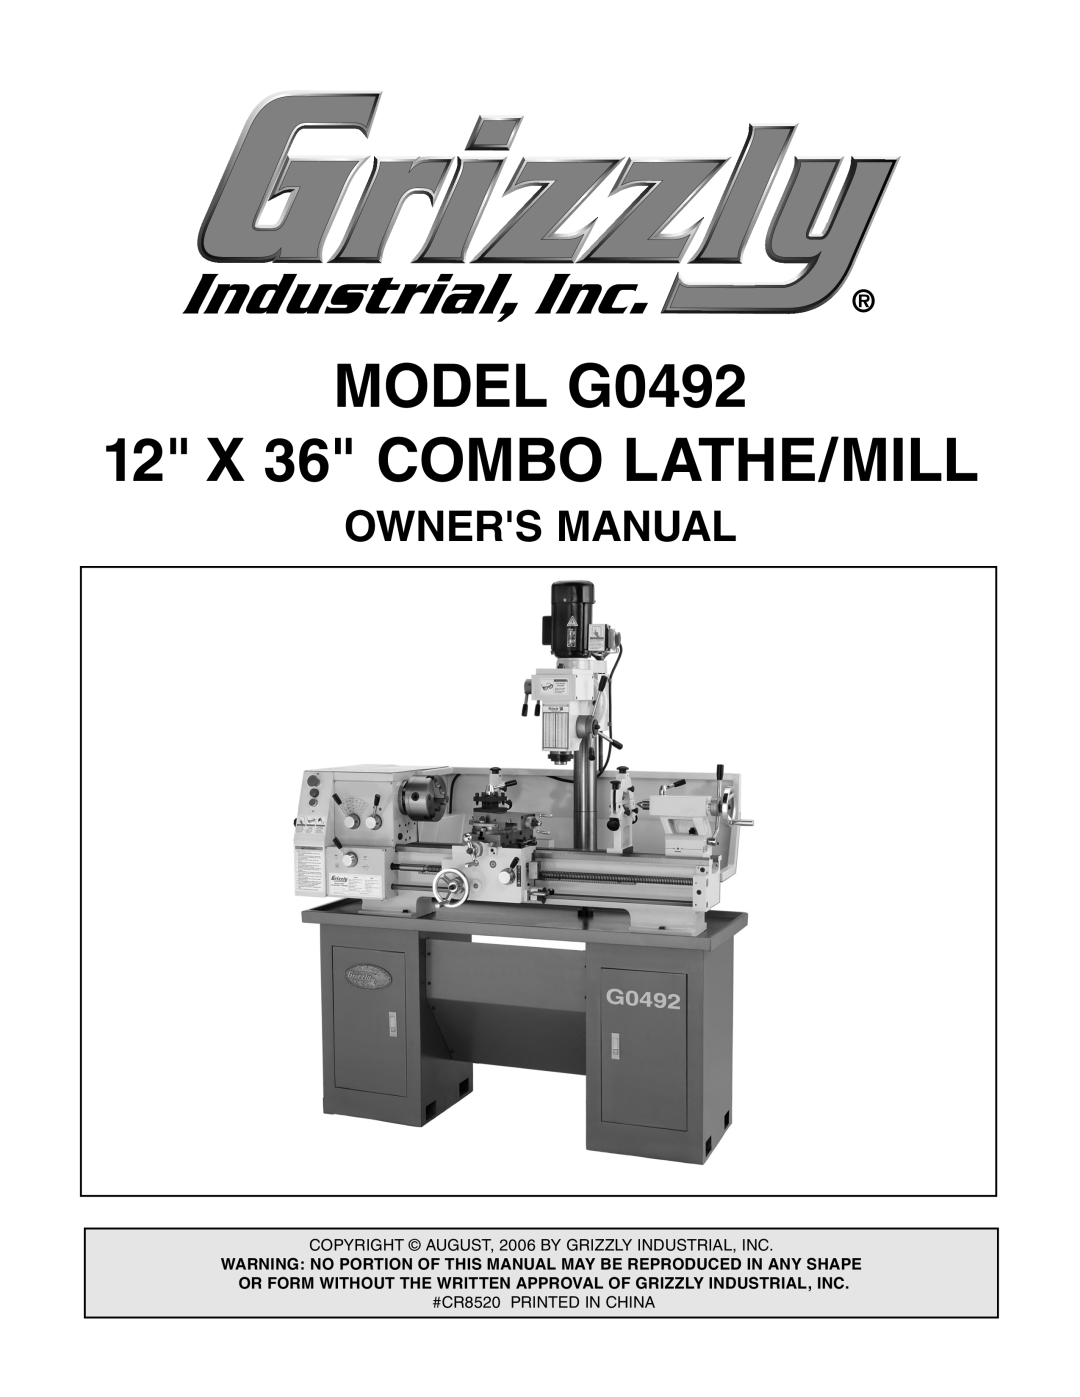 Grizzly manual MODEL G0492 12 X 36 COMBO LATHE/MILL 